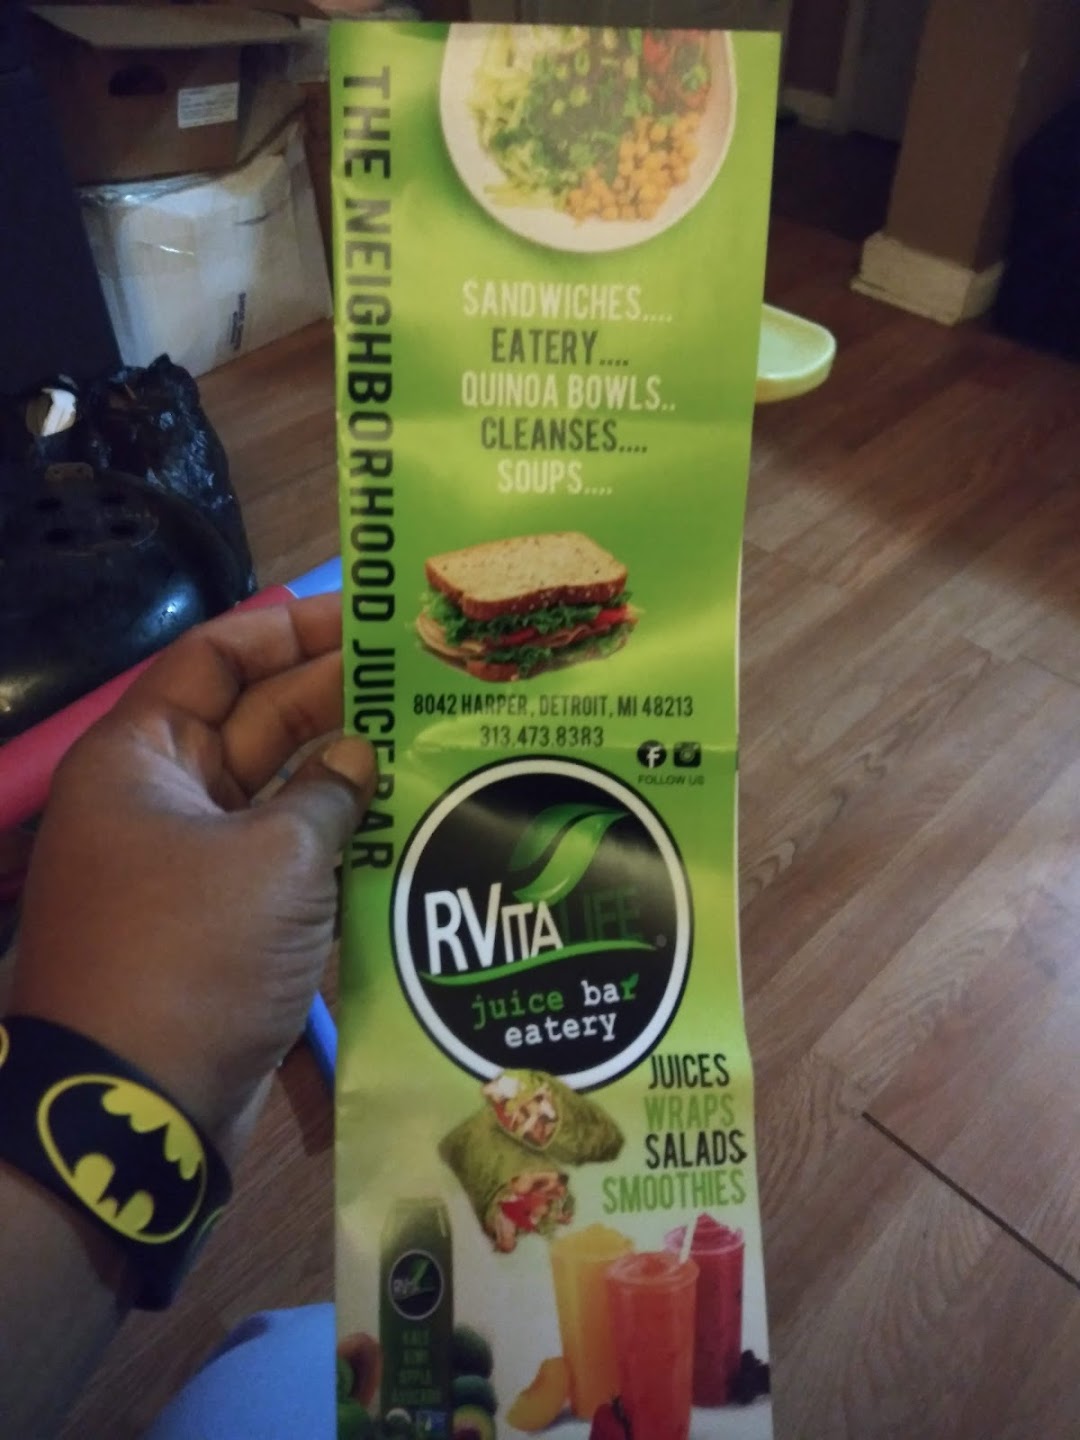 Revita juice bar and eatery